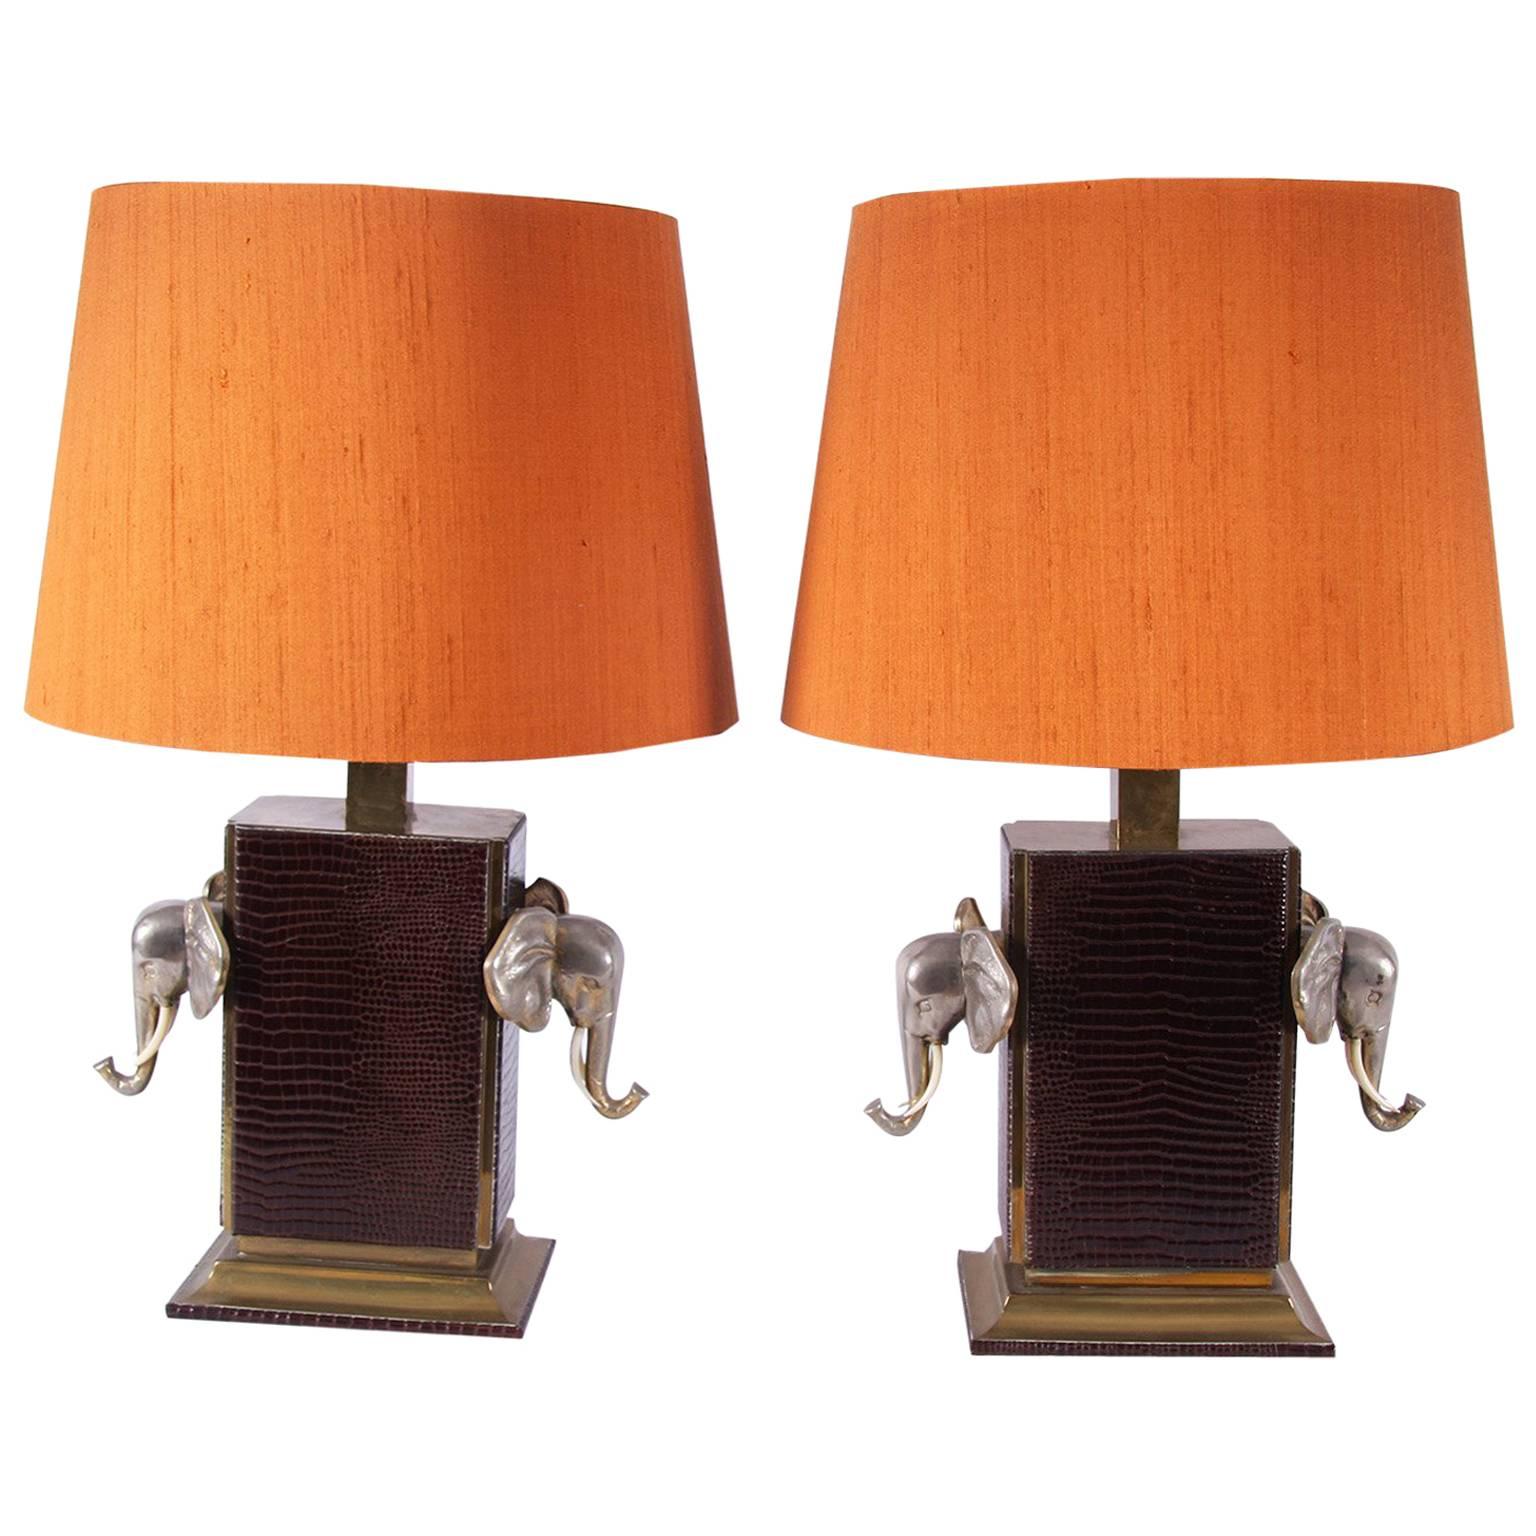 Pair of Table Lamps, Decorated with Elephant Heads, Italian, circa 1970